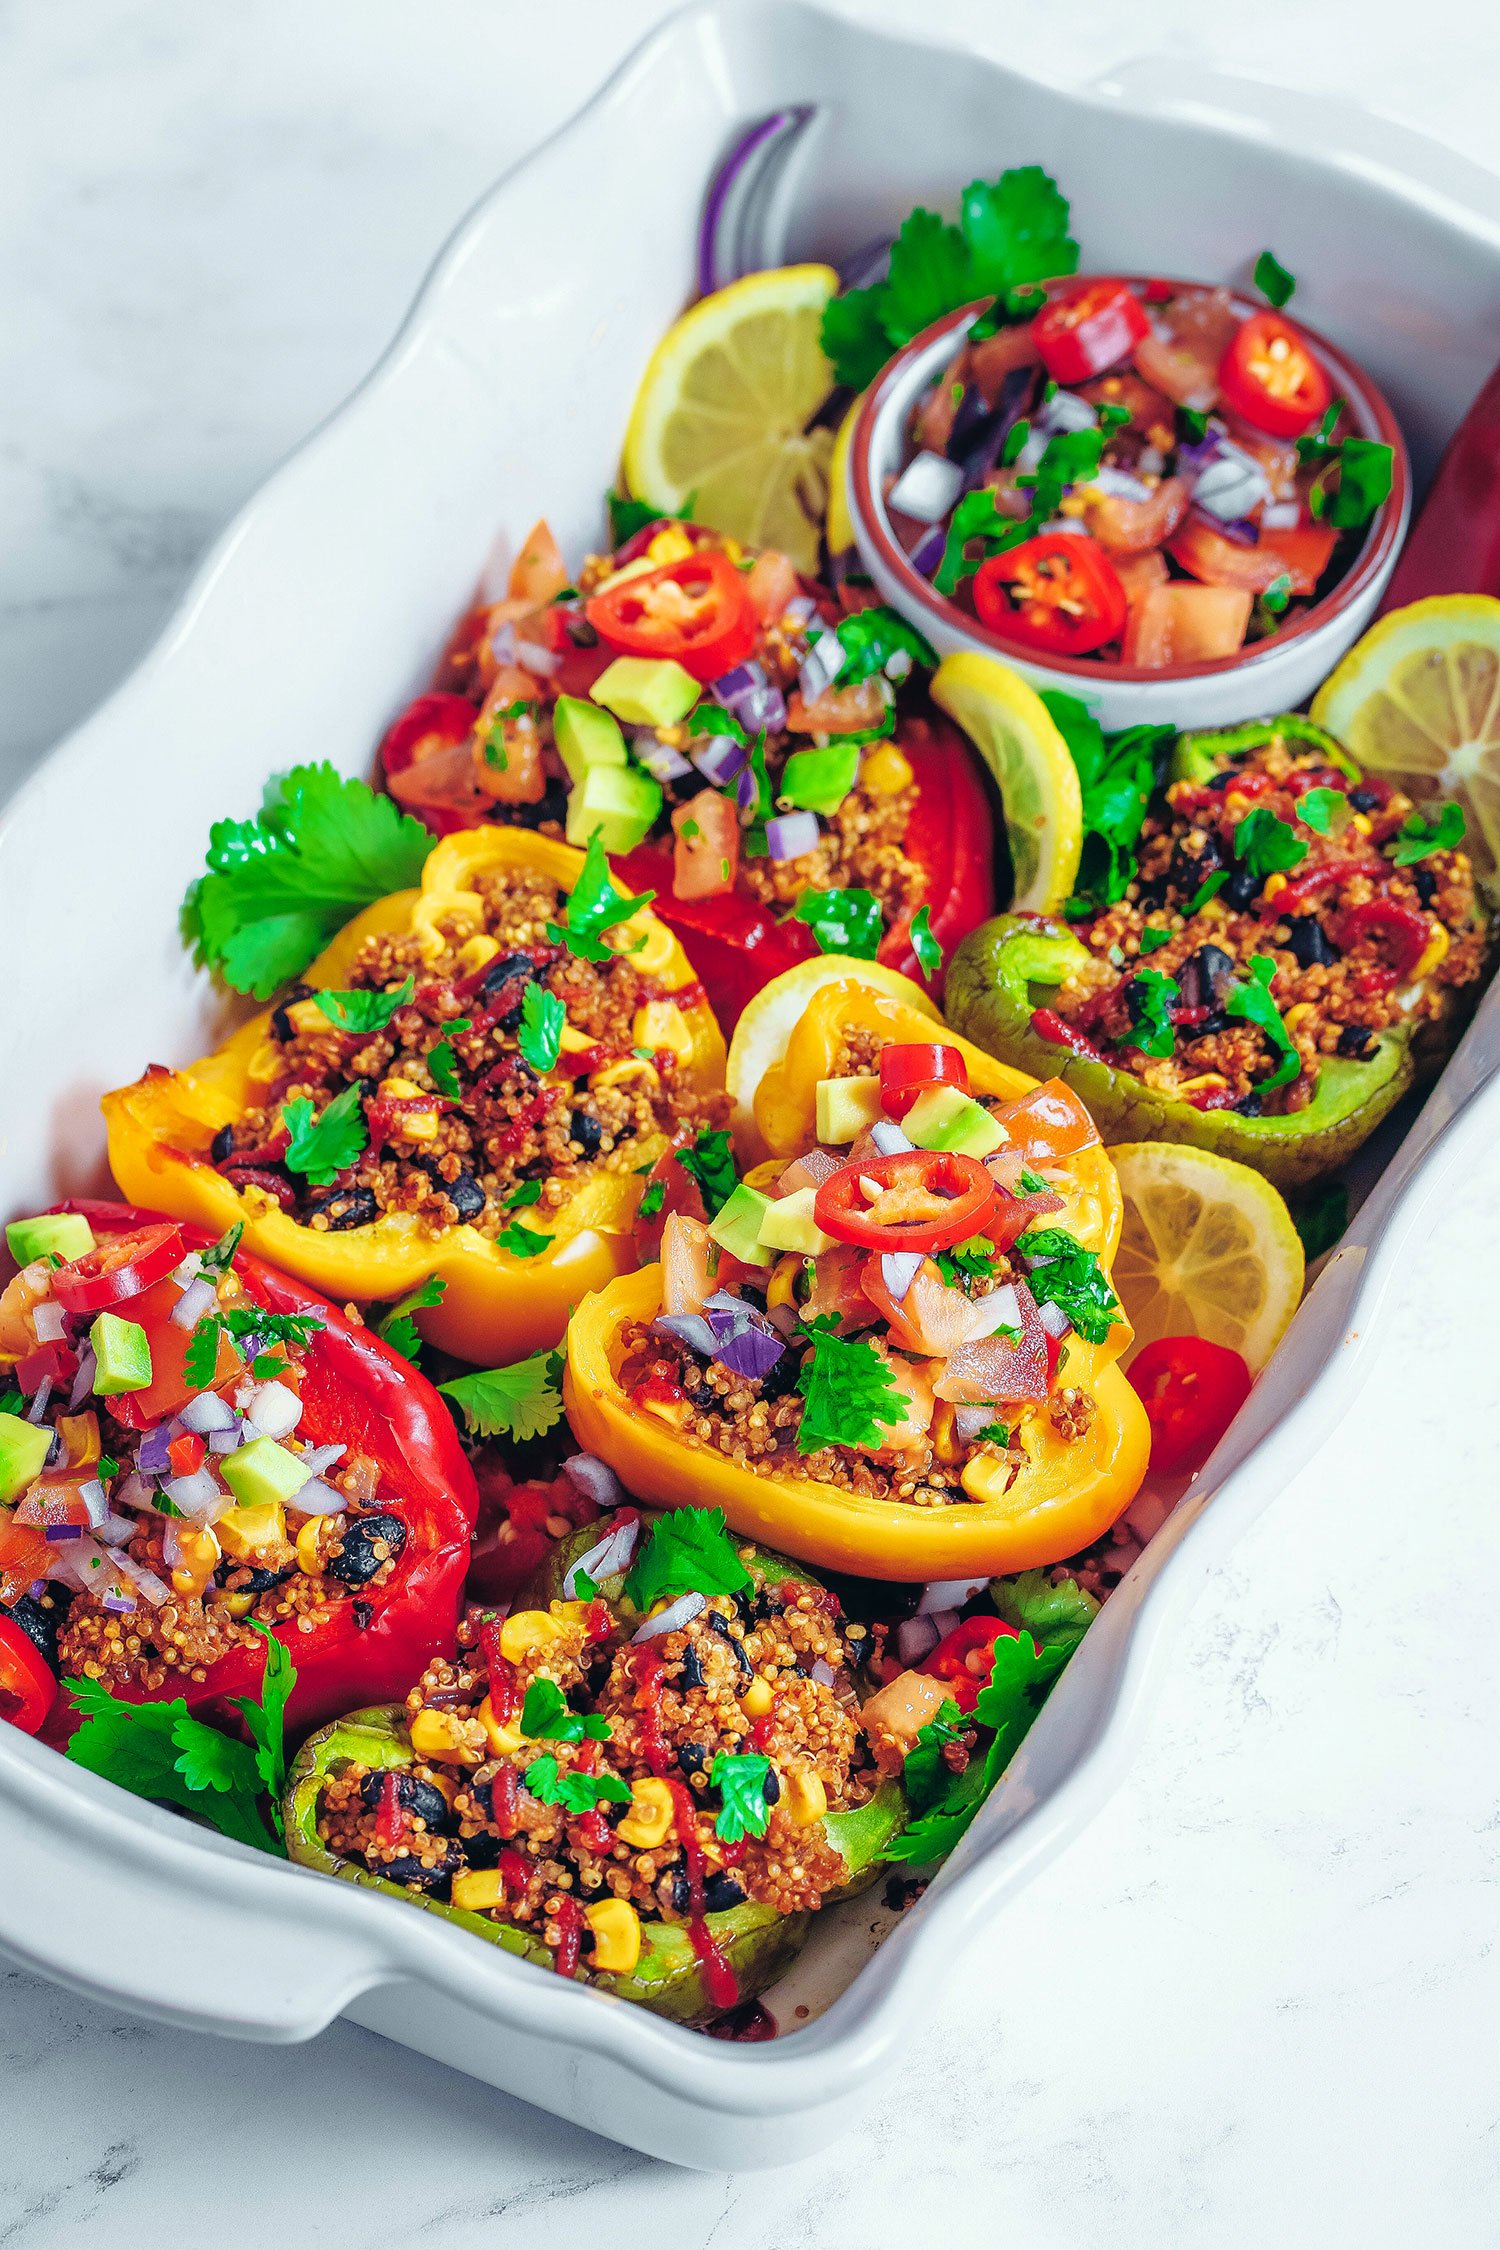 Mexican Quinoa Stuffed Peppers - Nadia's Healthy Kitchen